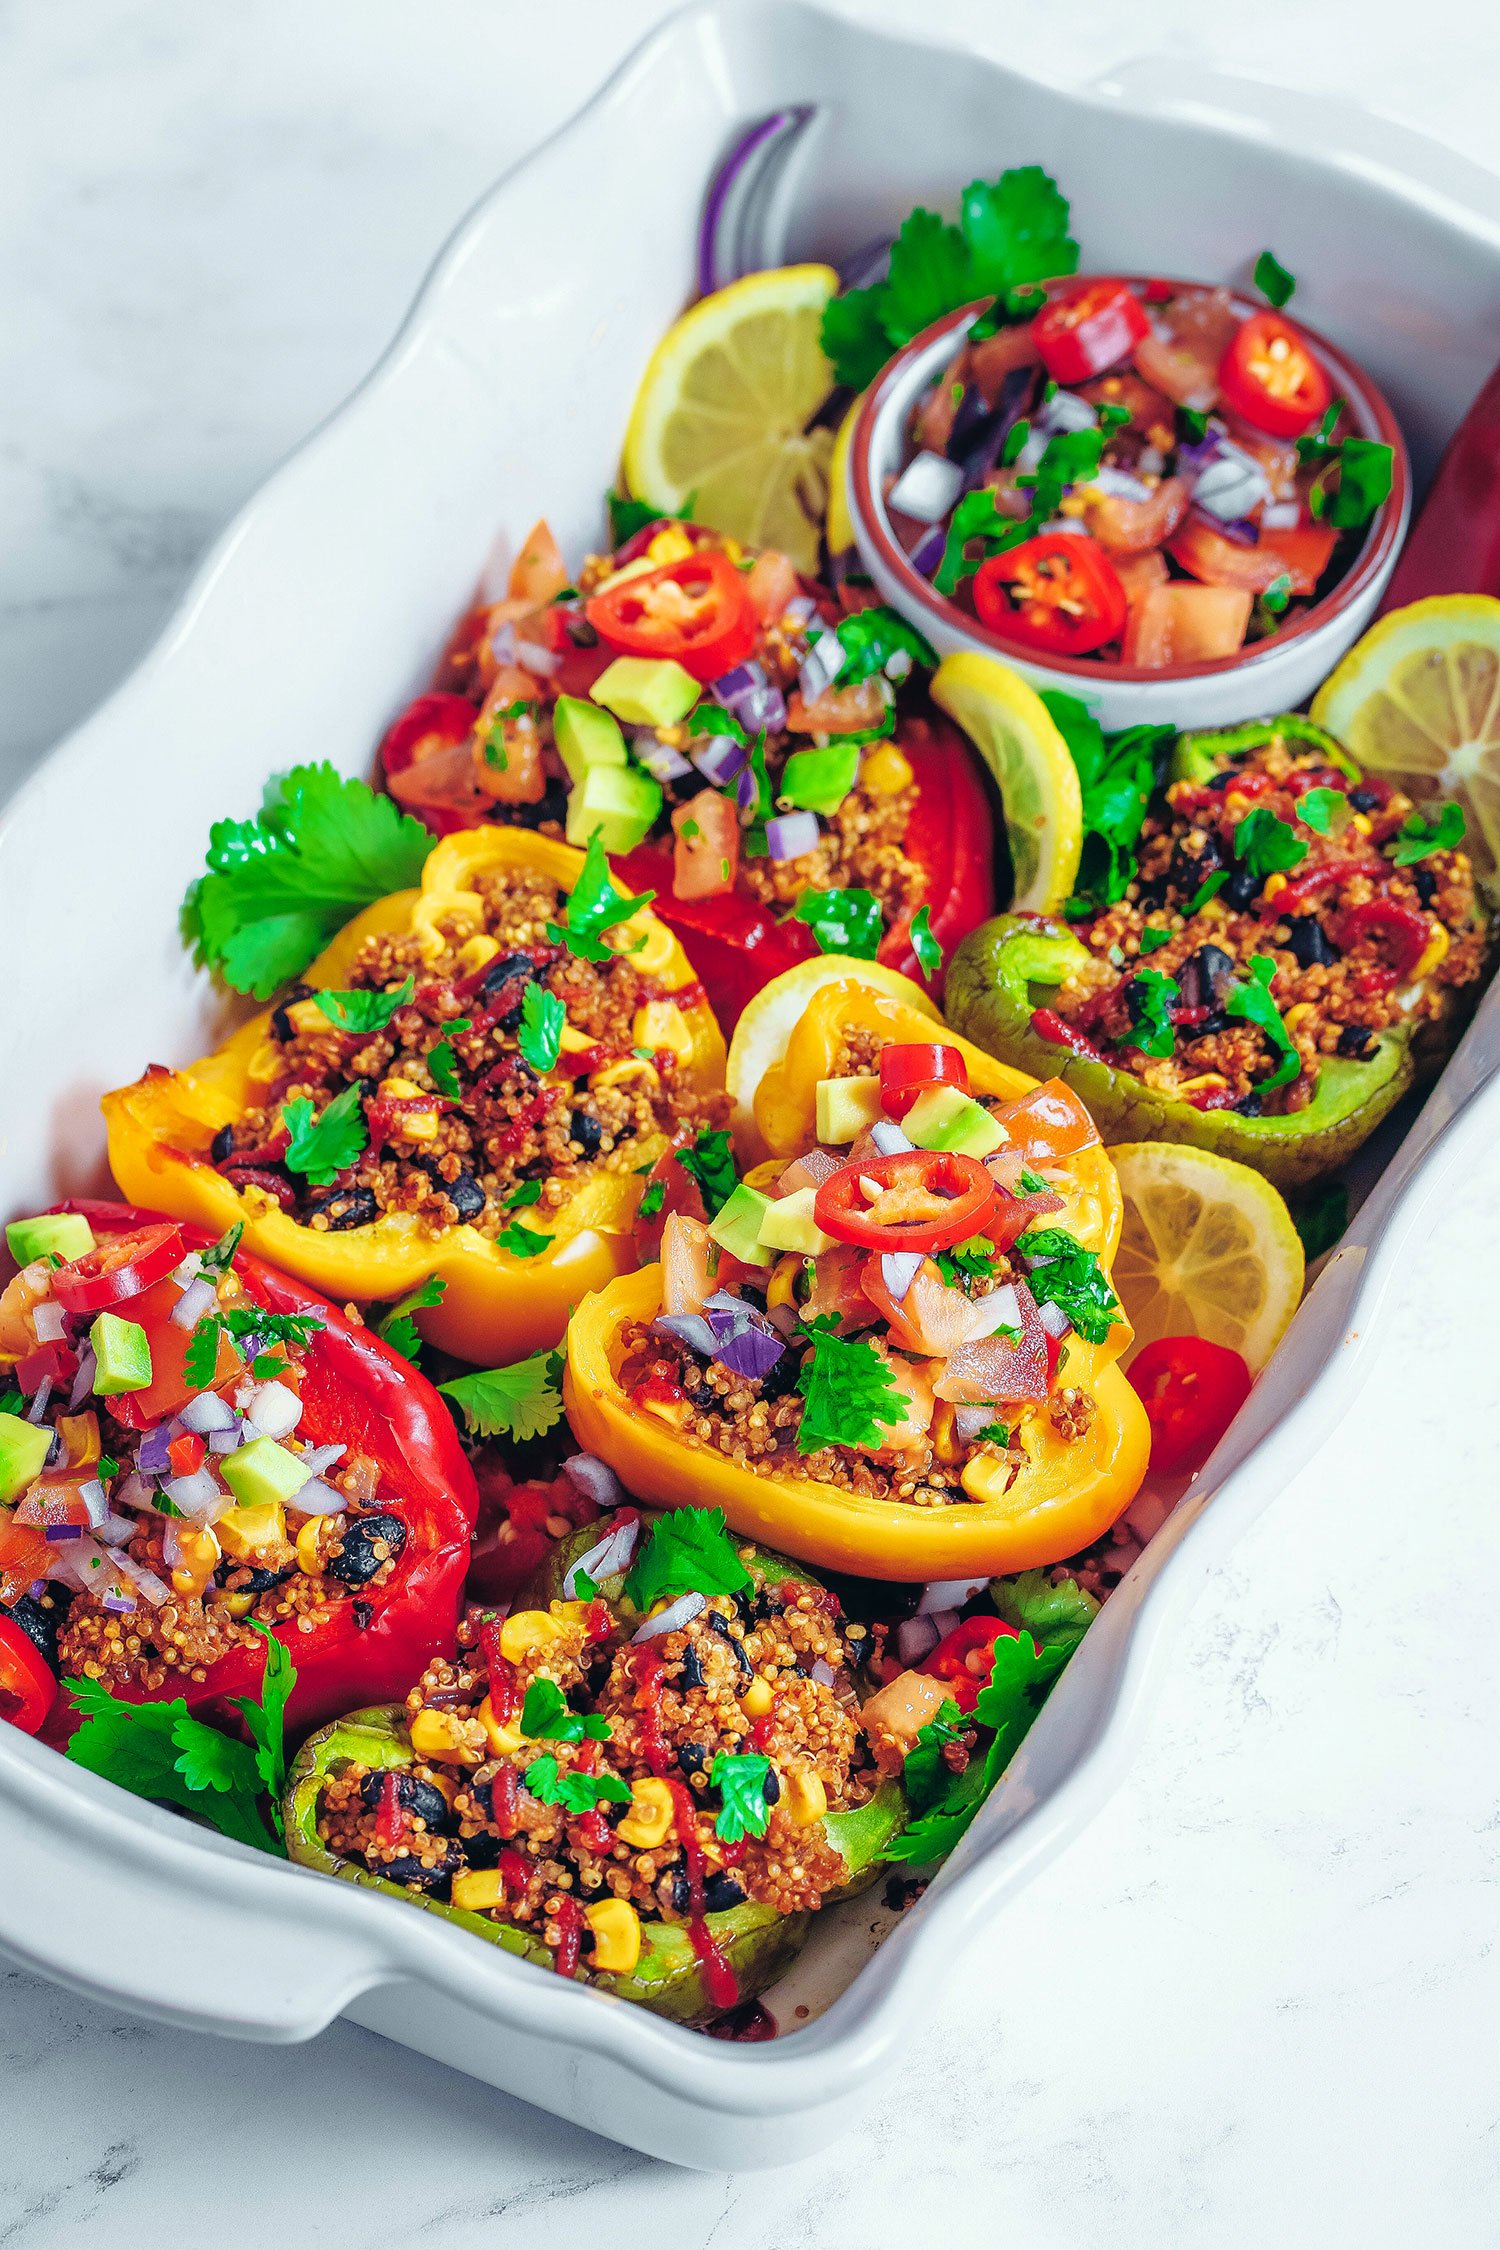 Mexican Quinoa Stuffed Peppers - Nadia's Healthy Kitchen